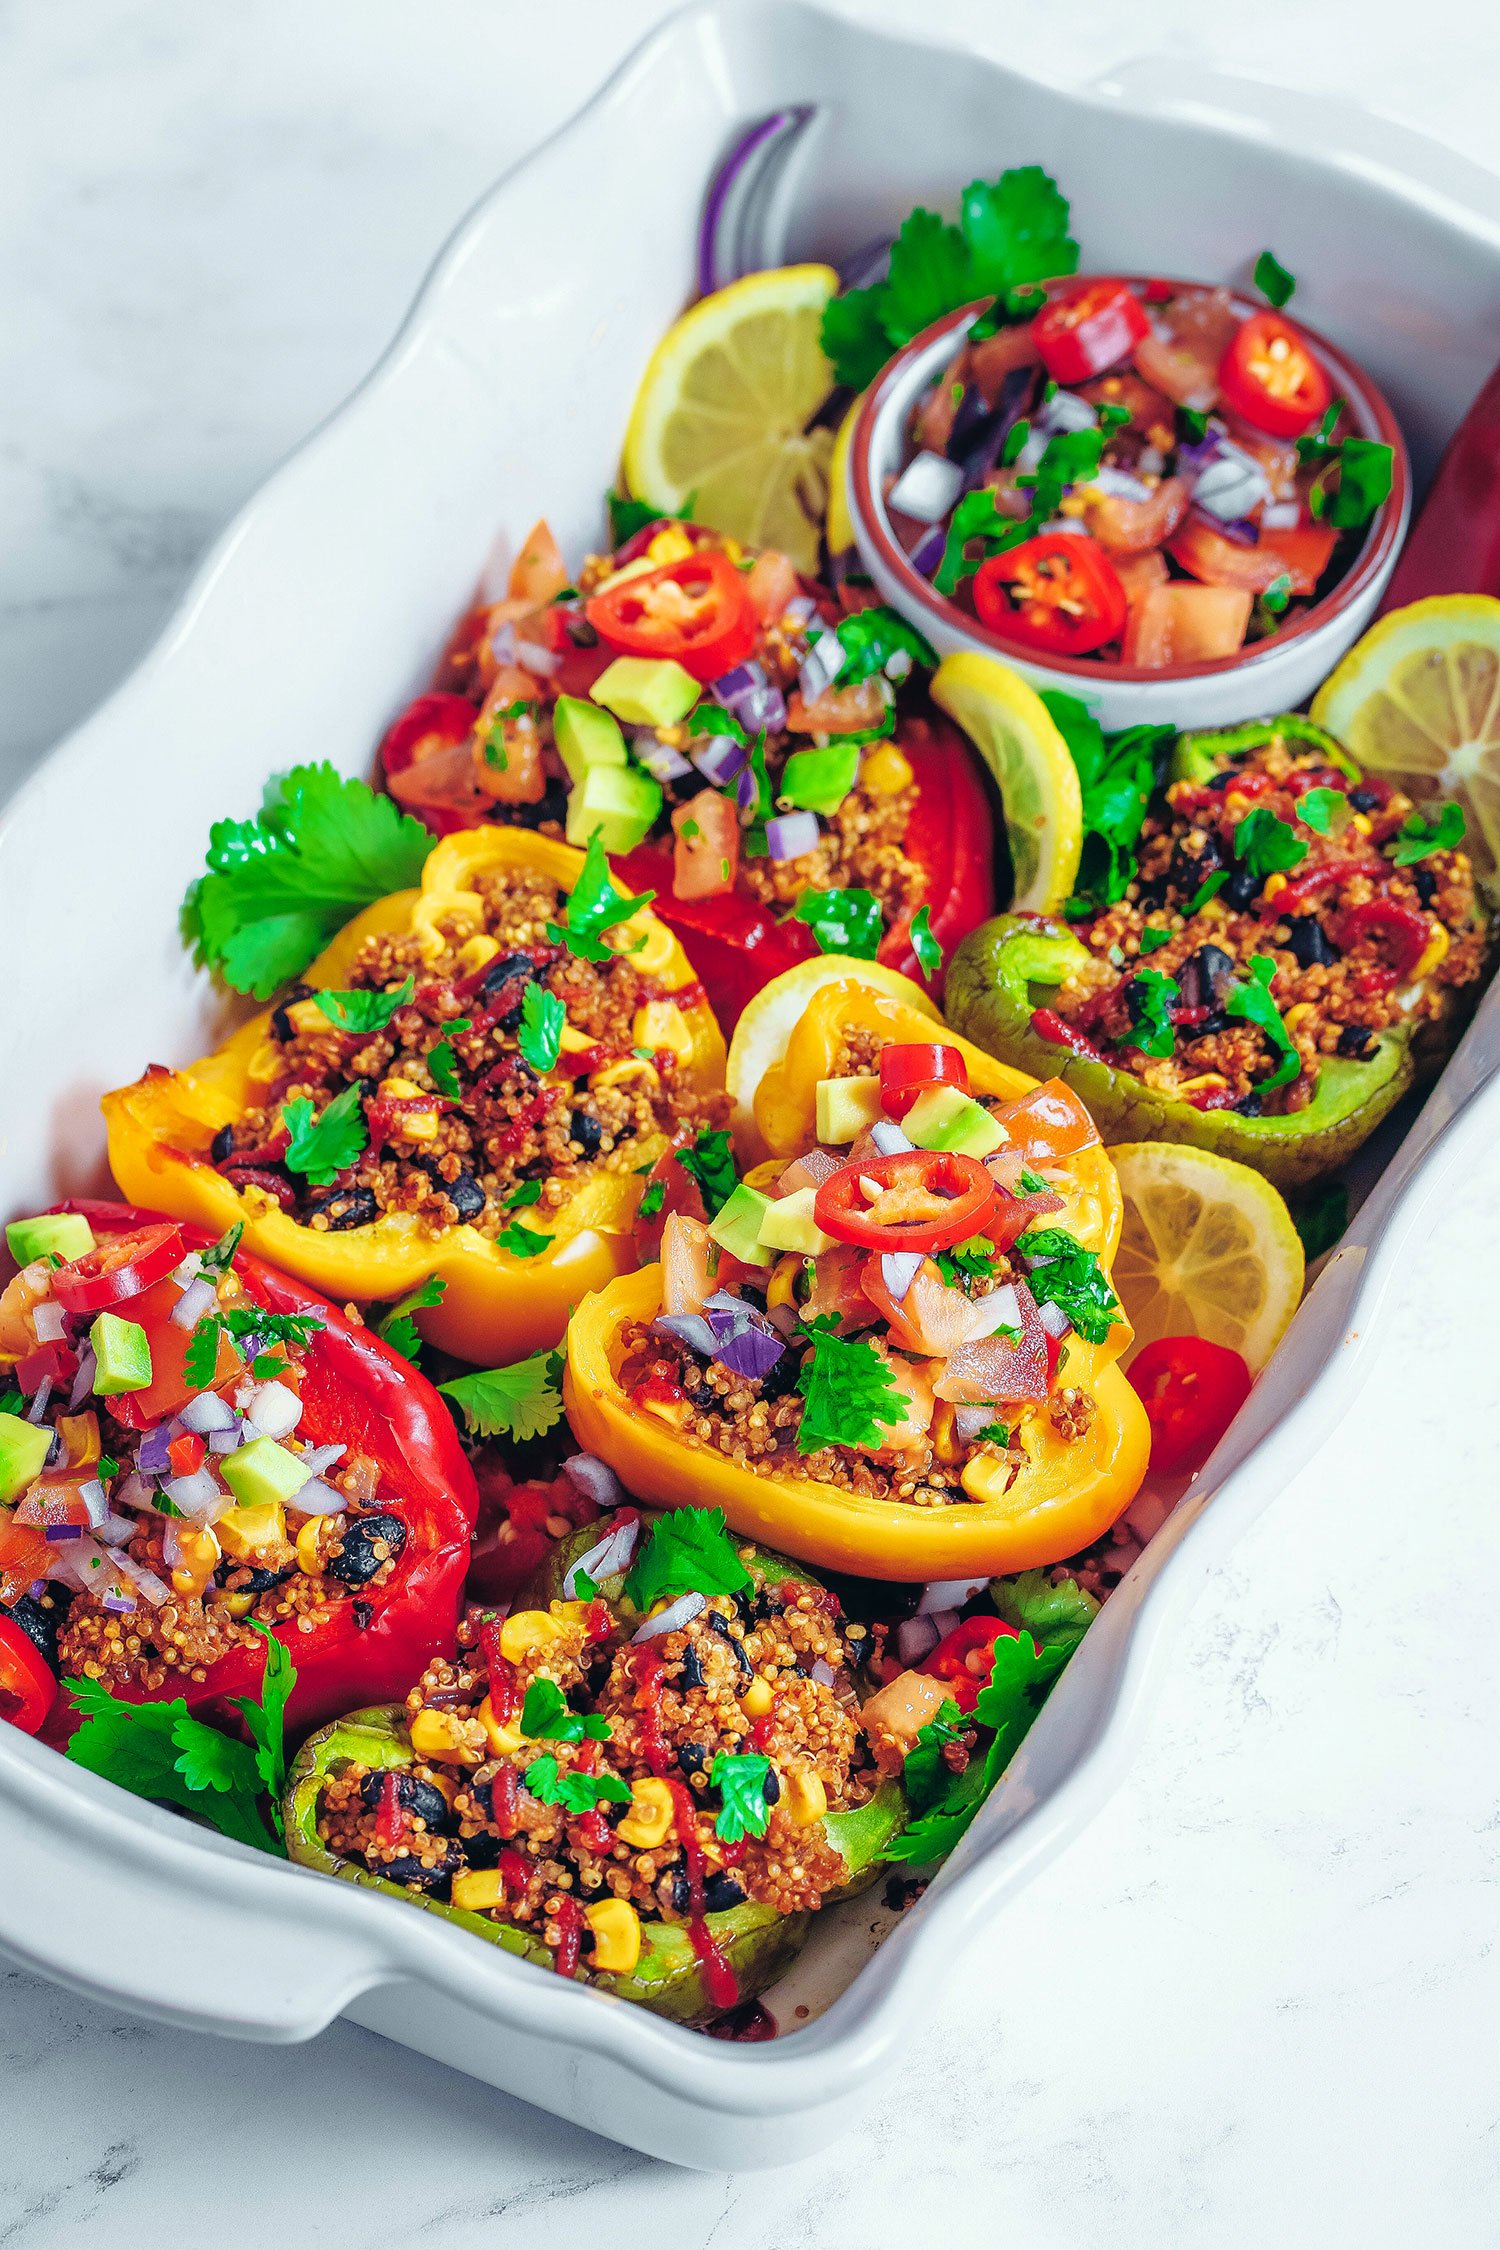 Mexican Quinoa Stuffed Peppers - Nadia's Healthy Kitchen